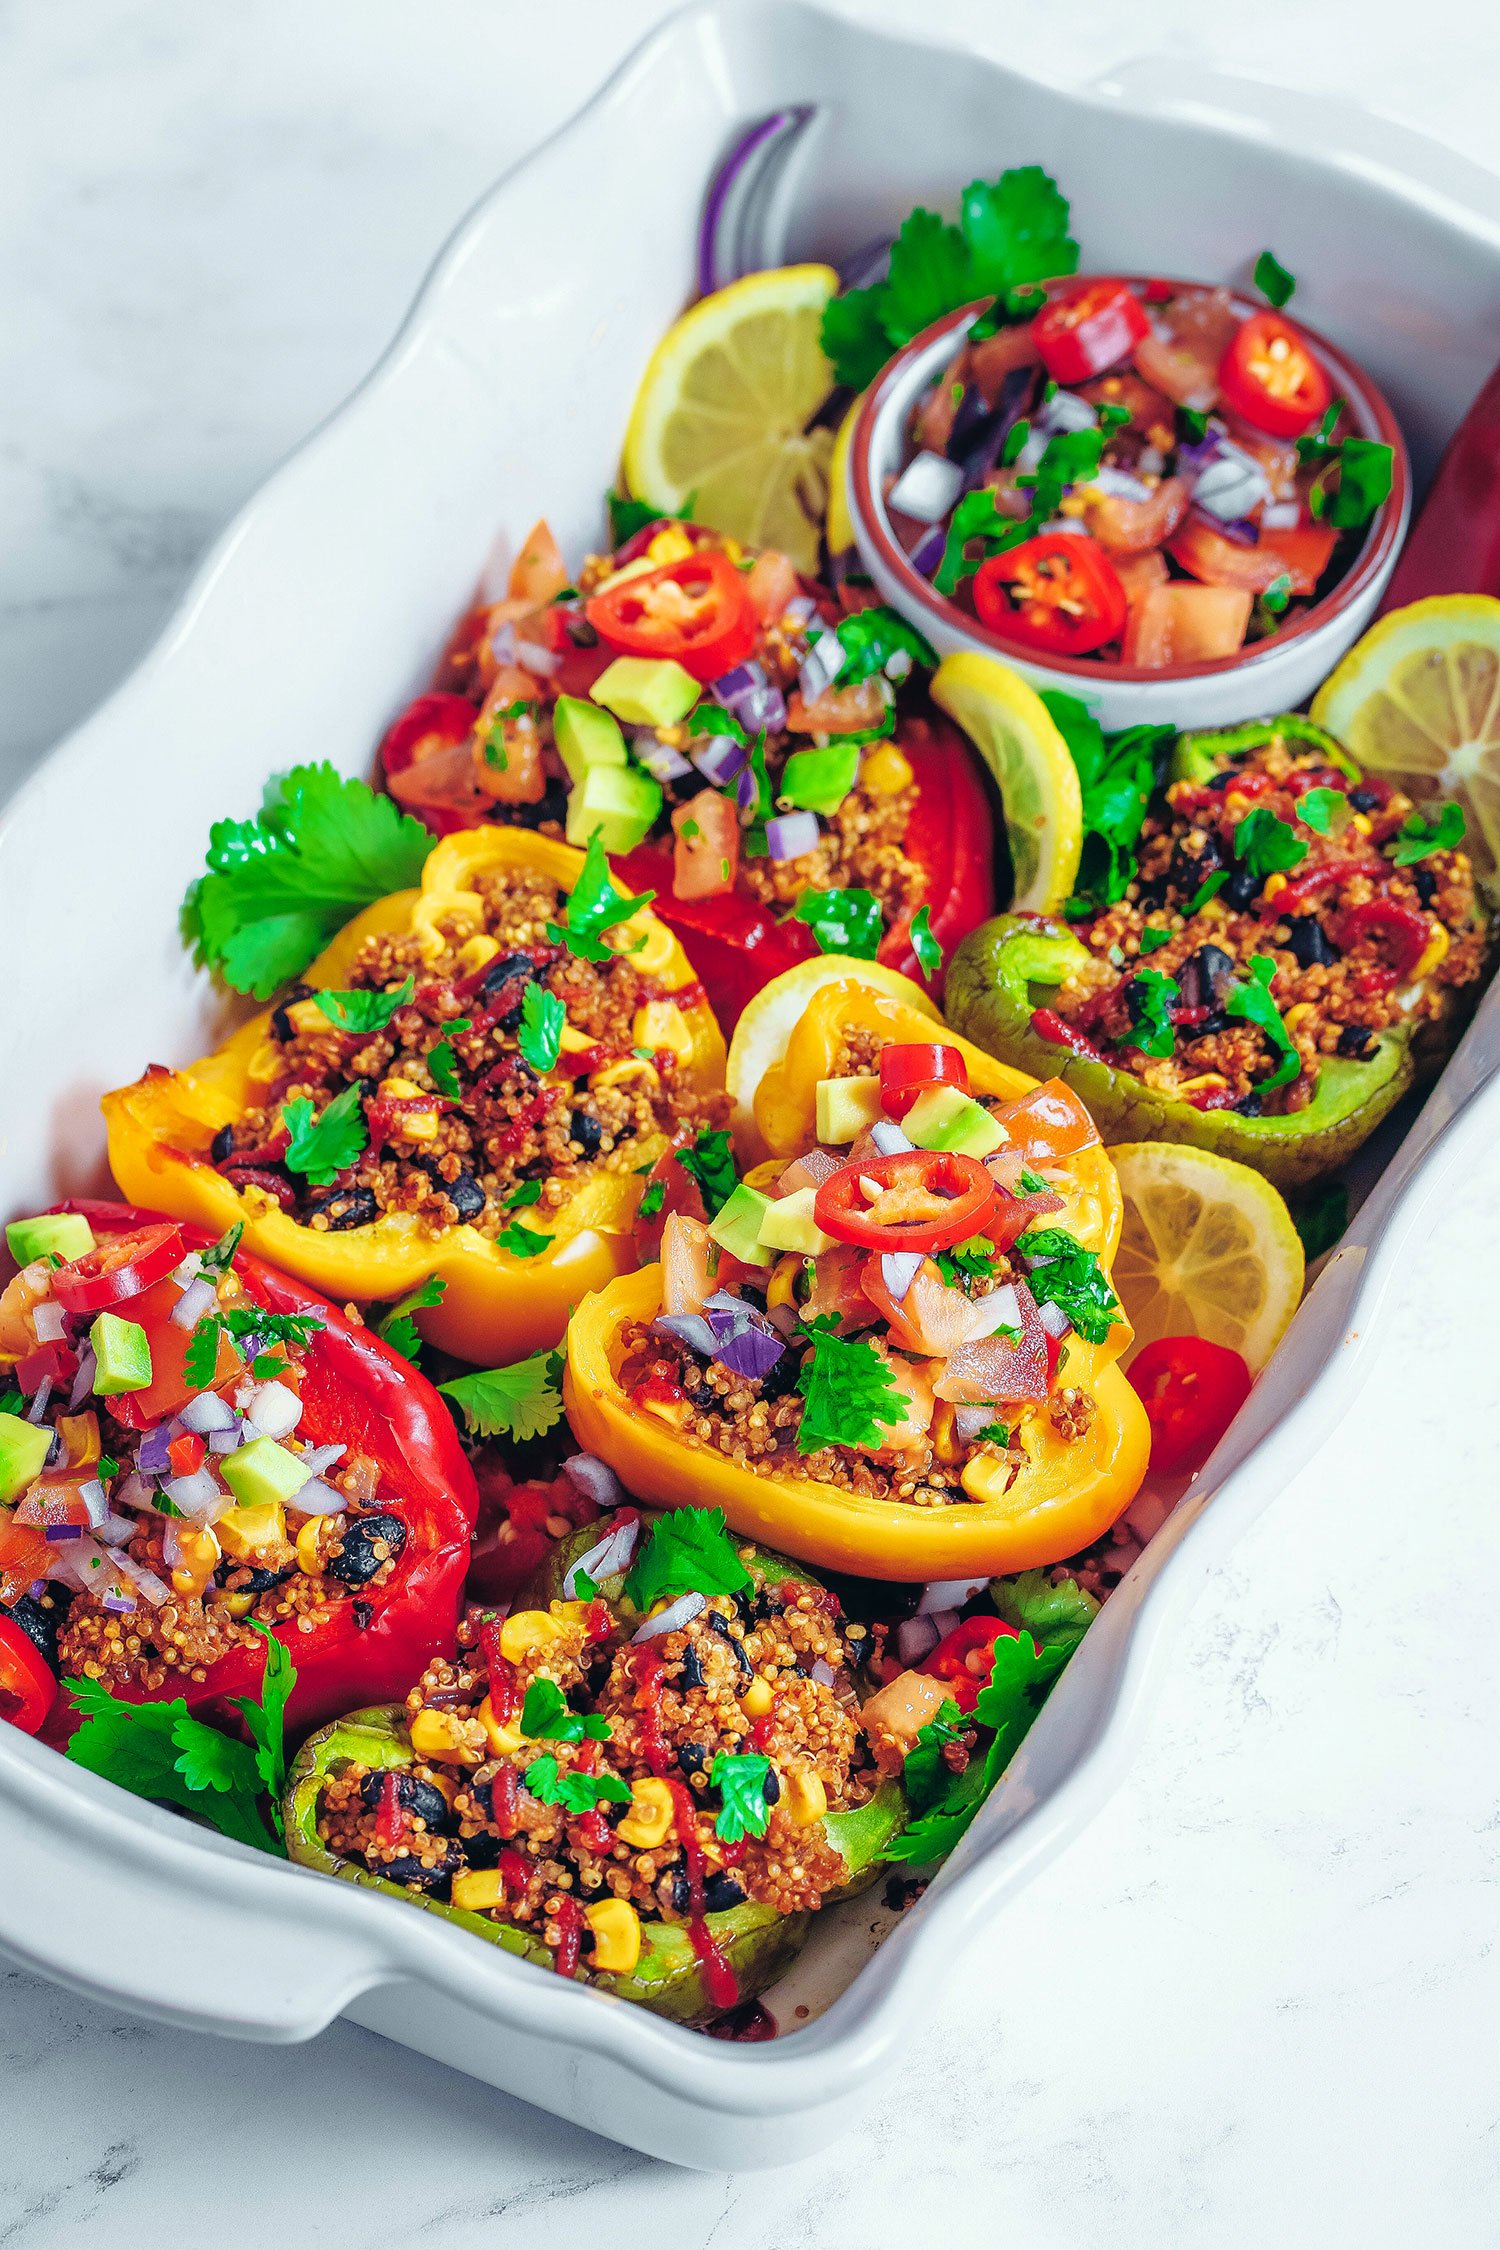 Mexican Quinoa Stuffed Peppers - Nadia's Healthy Kitchen